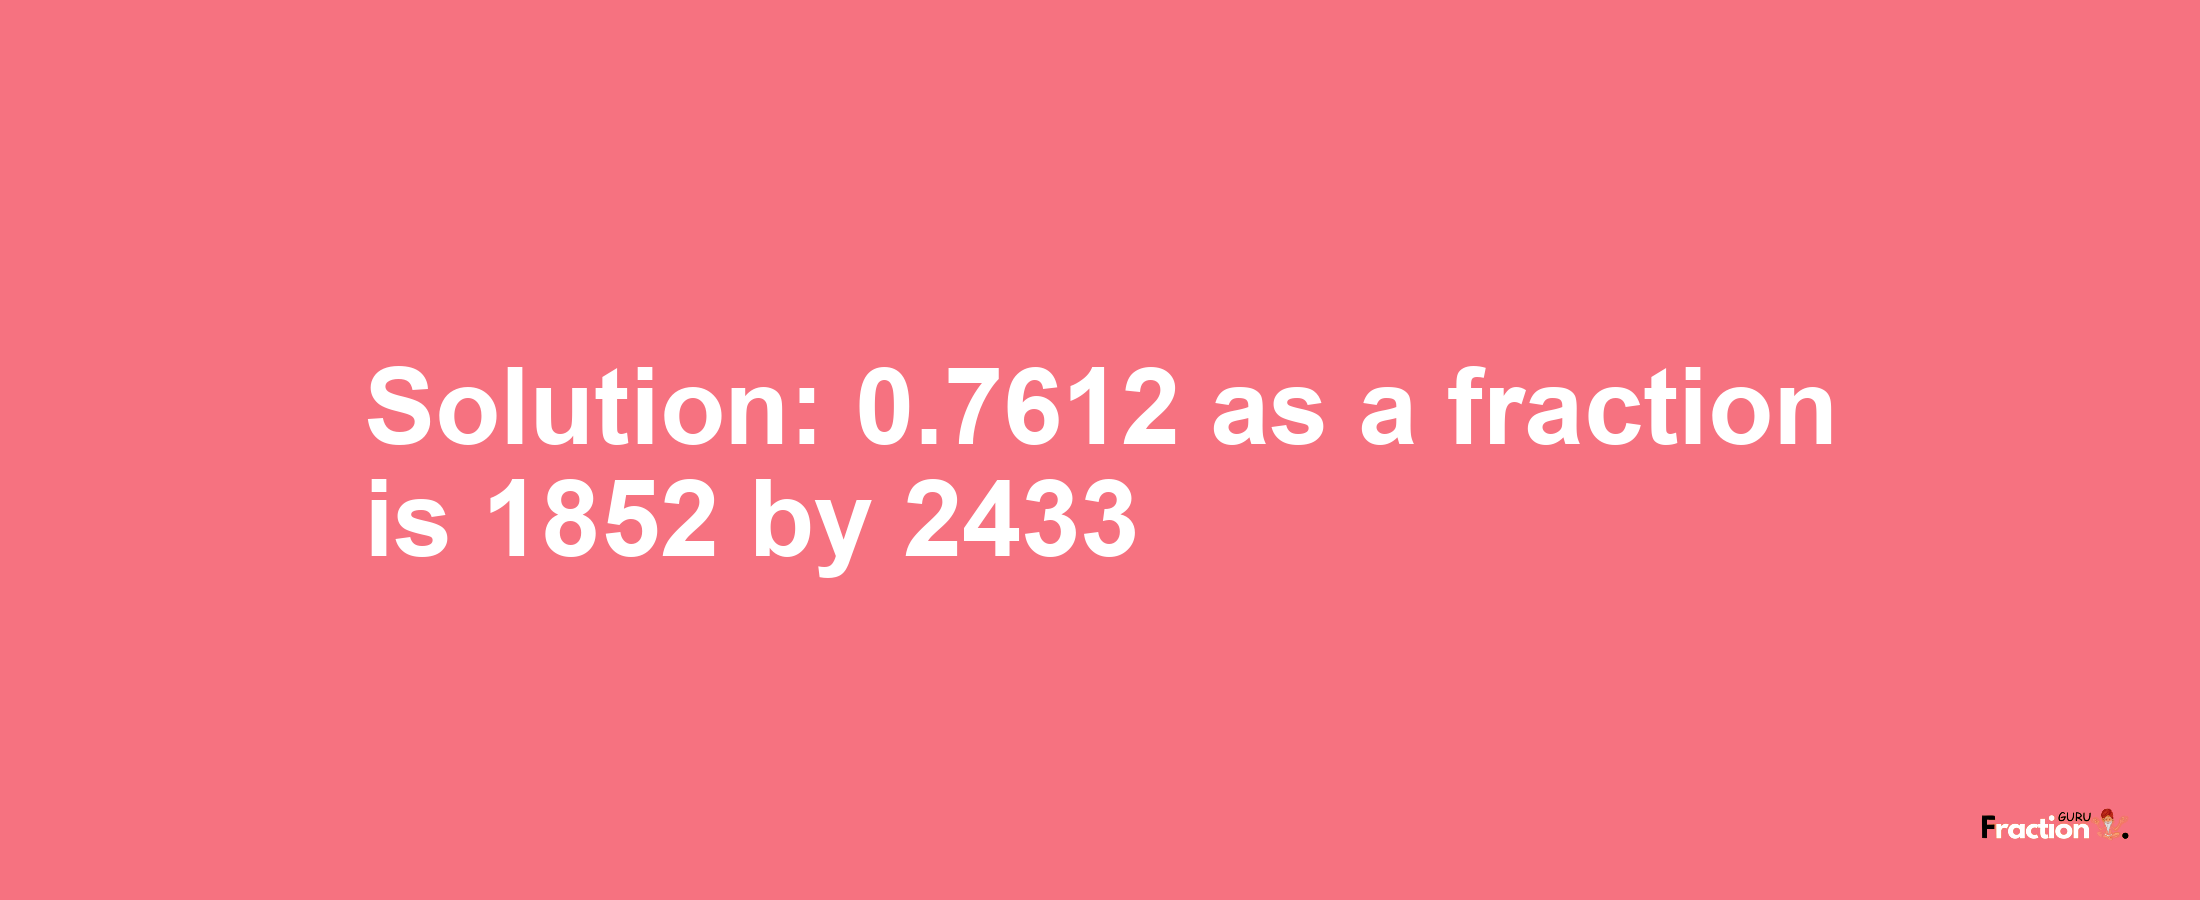 Solution:0.7612 as a fraction is 1852/2433